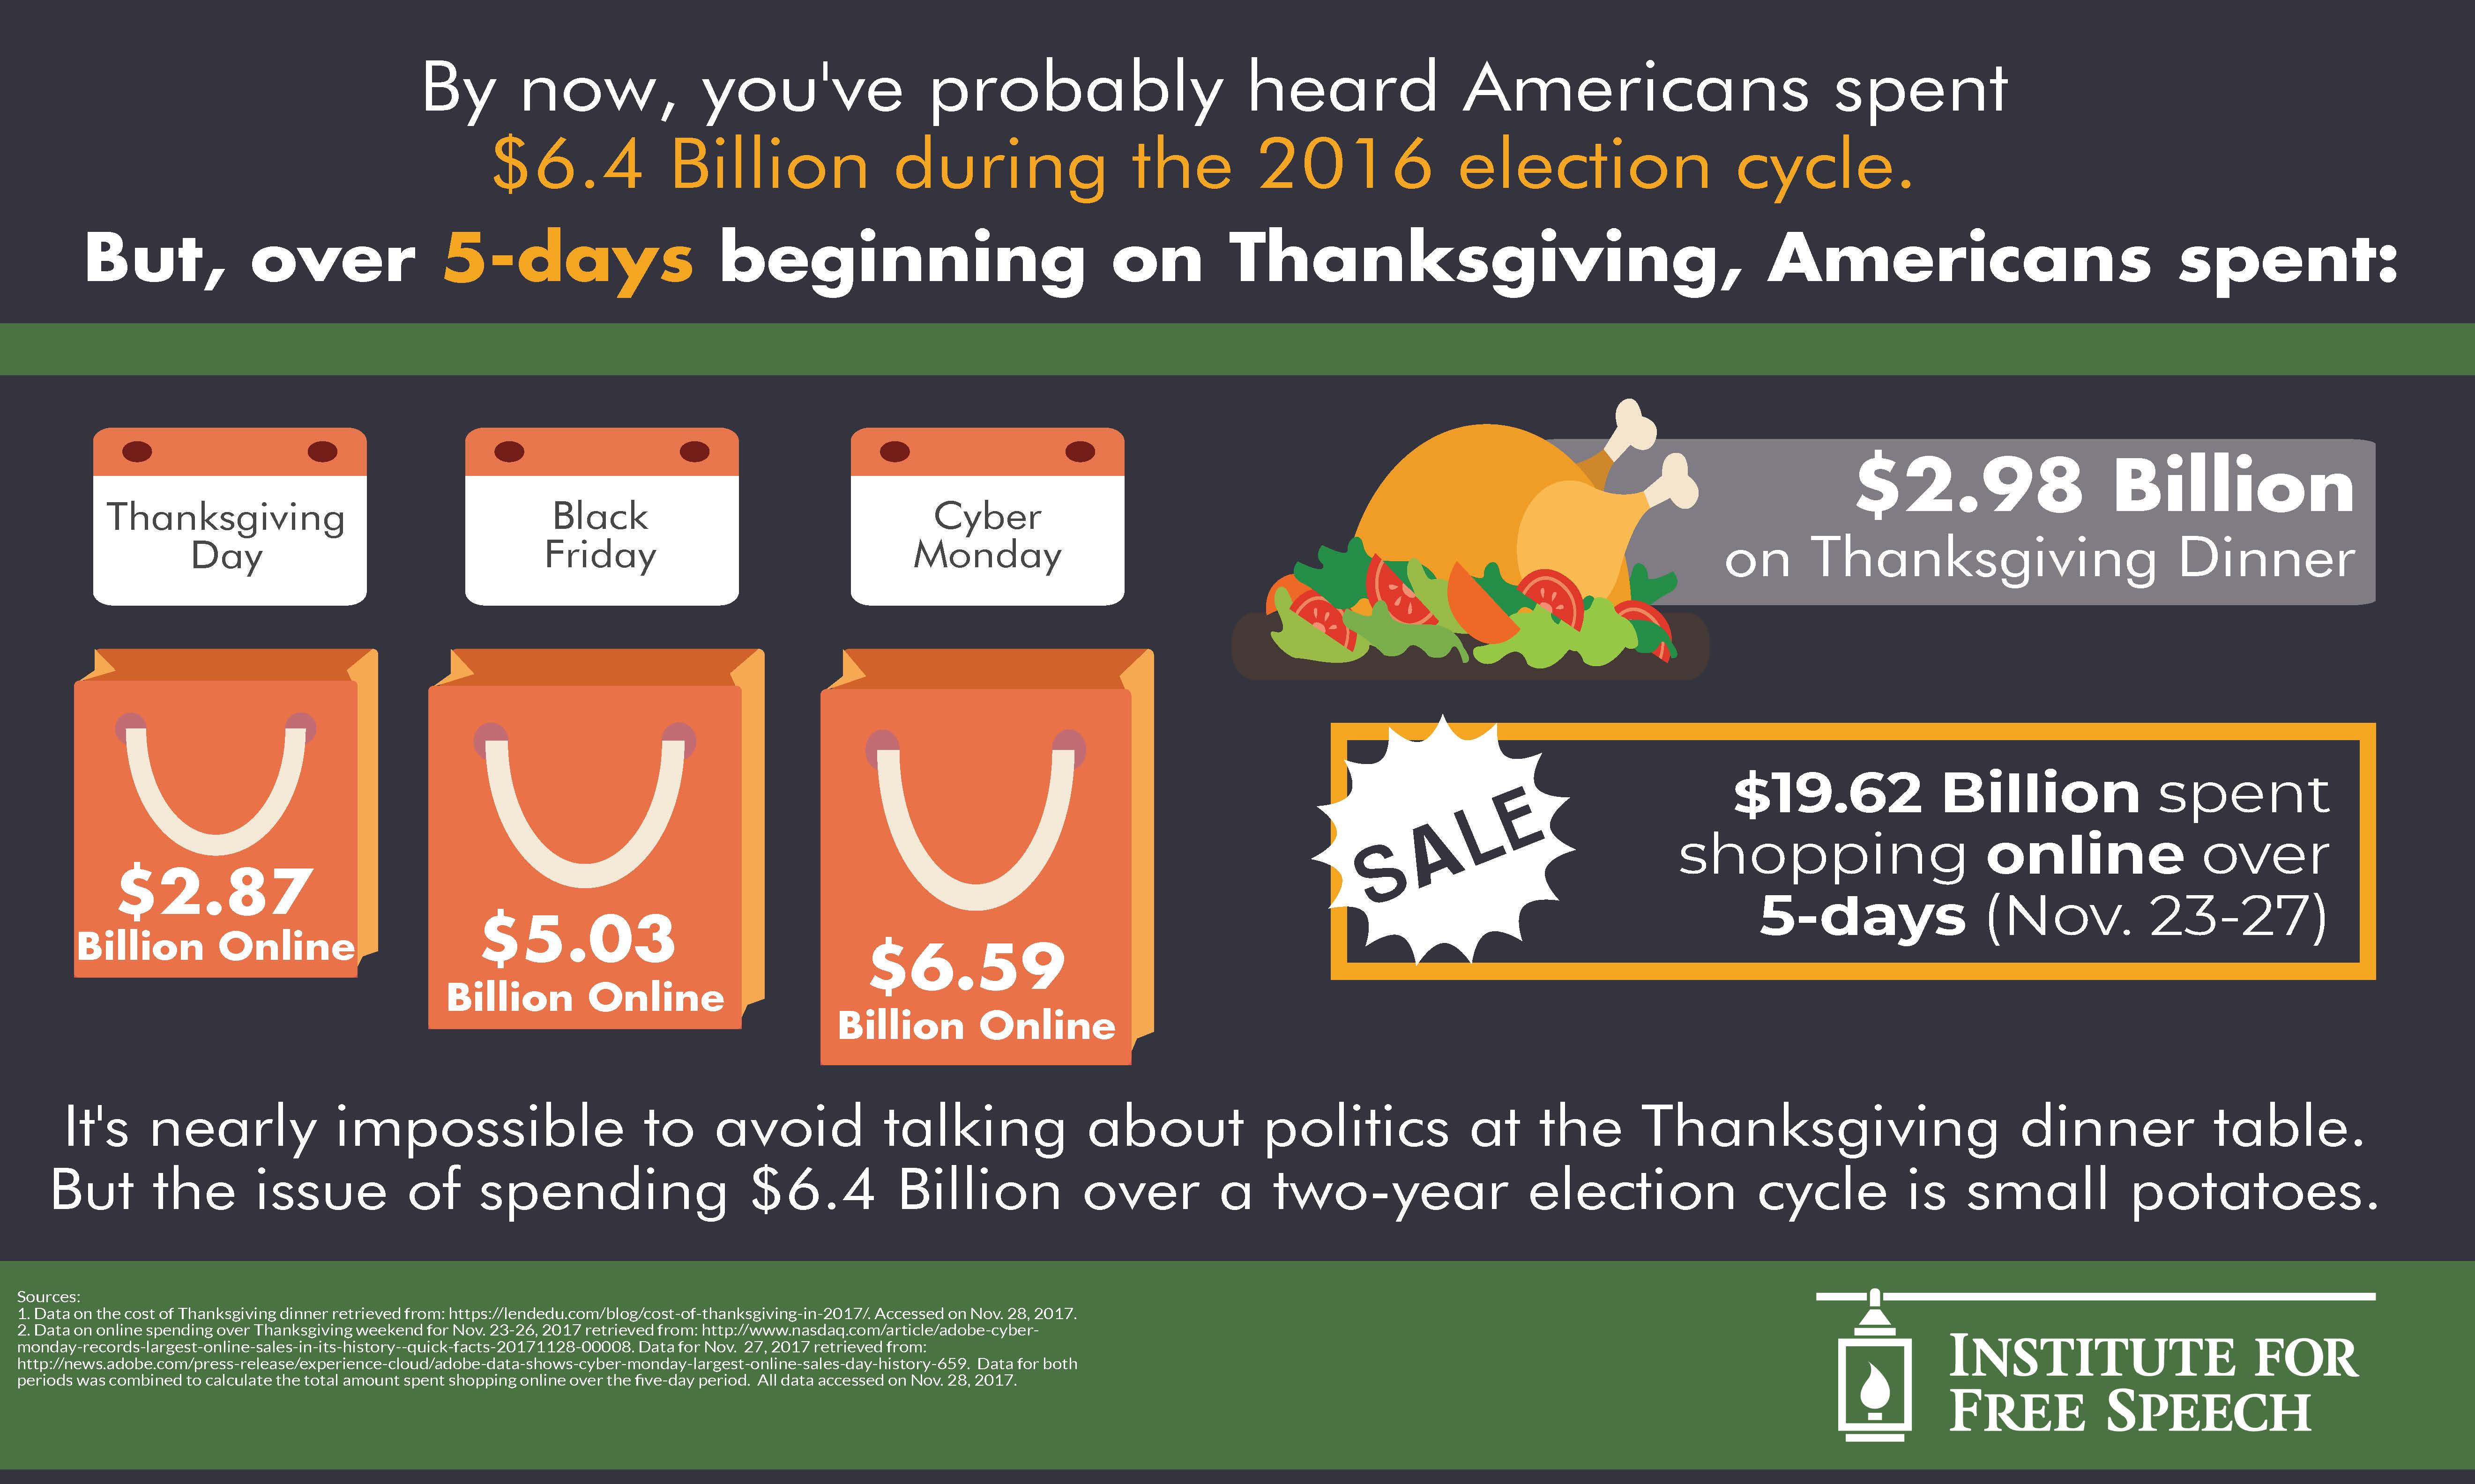 Comparing 2016 Election Statistics & Thanksgiving Spending IFS